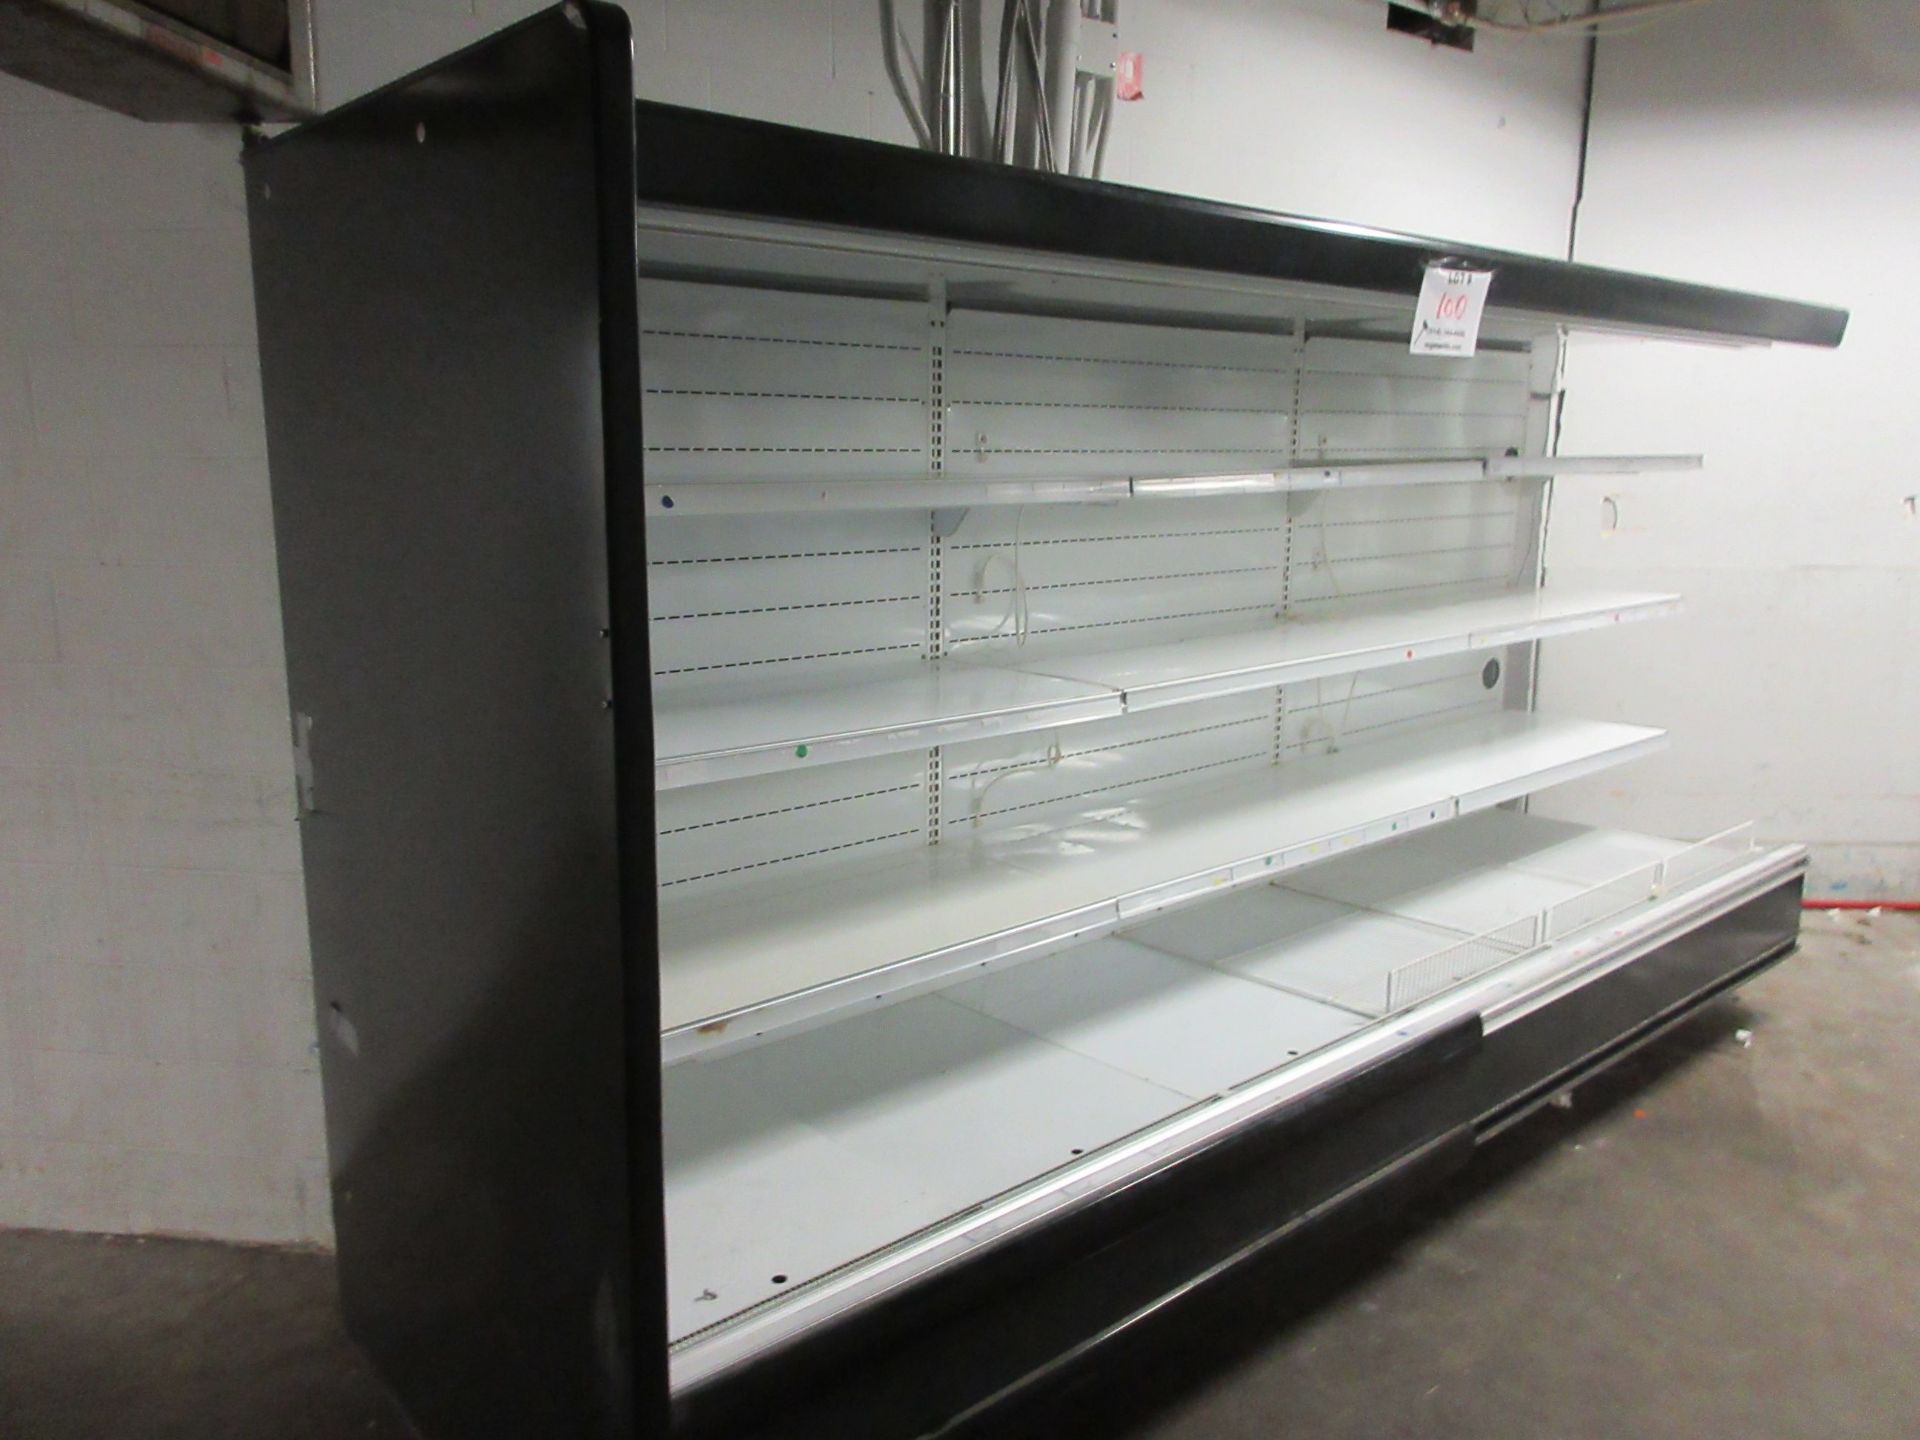 ARNEG open refrigerated unit model: PL05-2 12' without compressor aprox. 12ft w x 79"h x 43"d